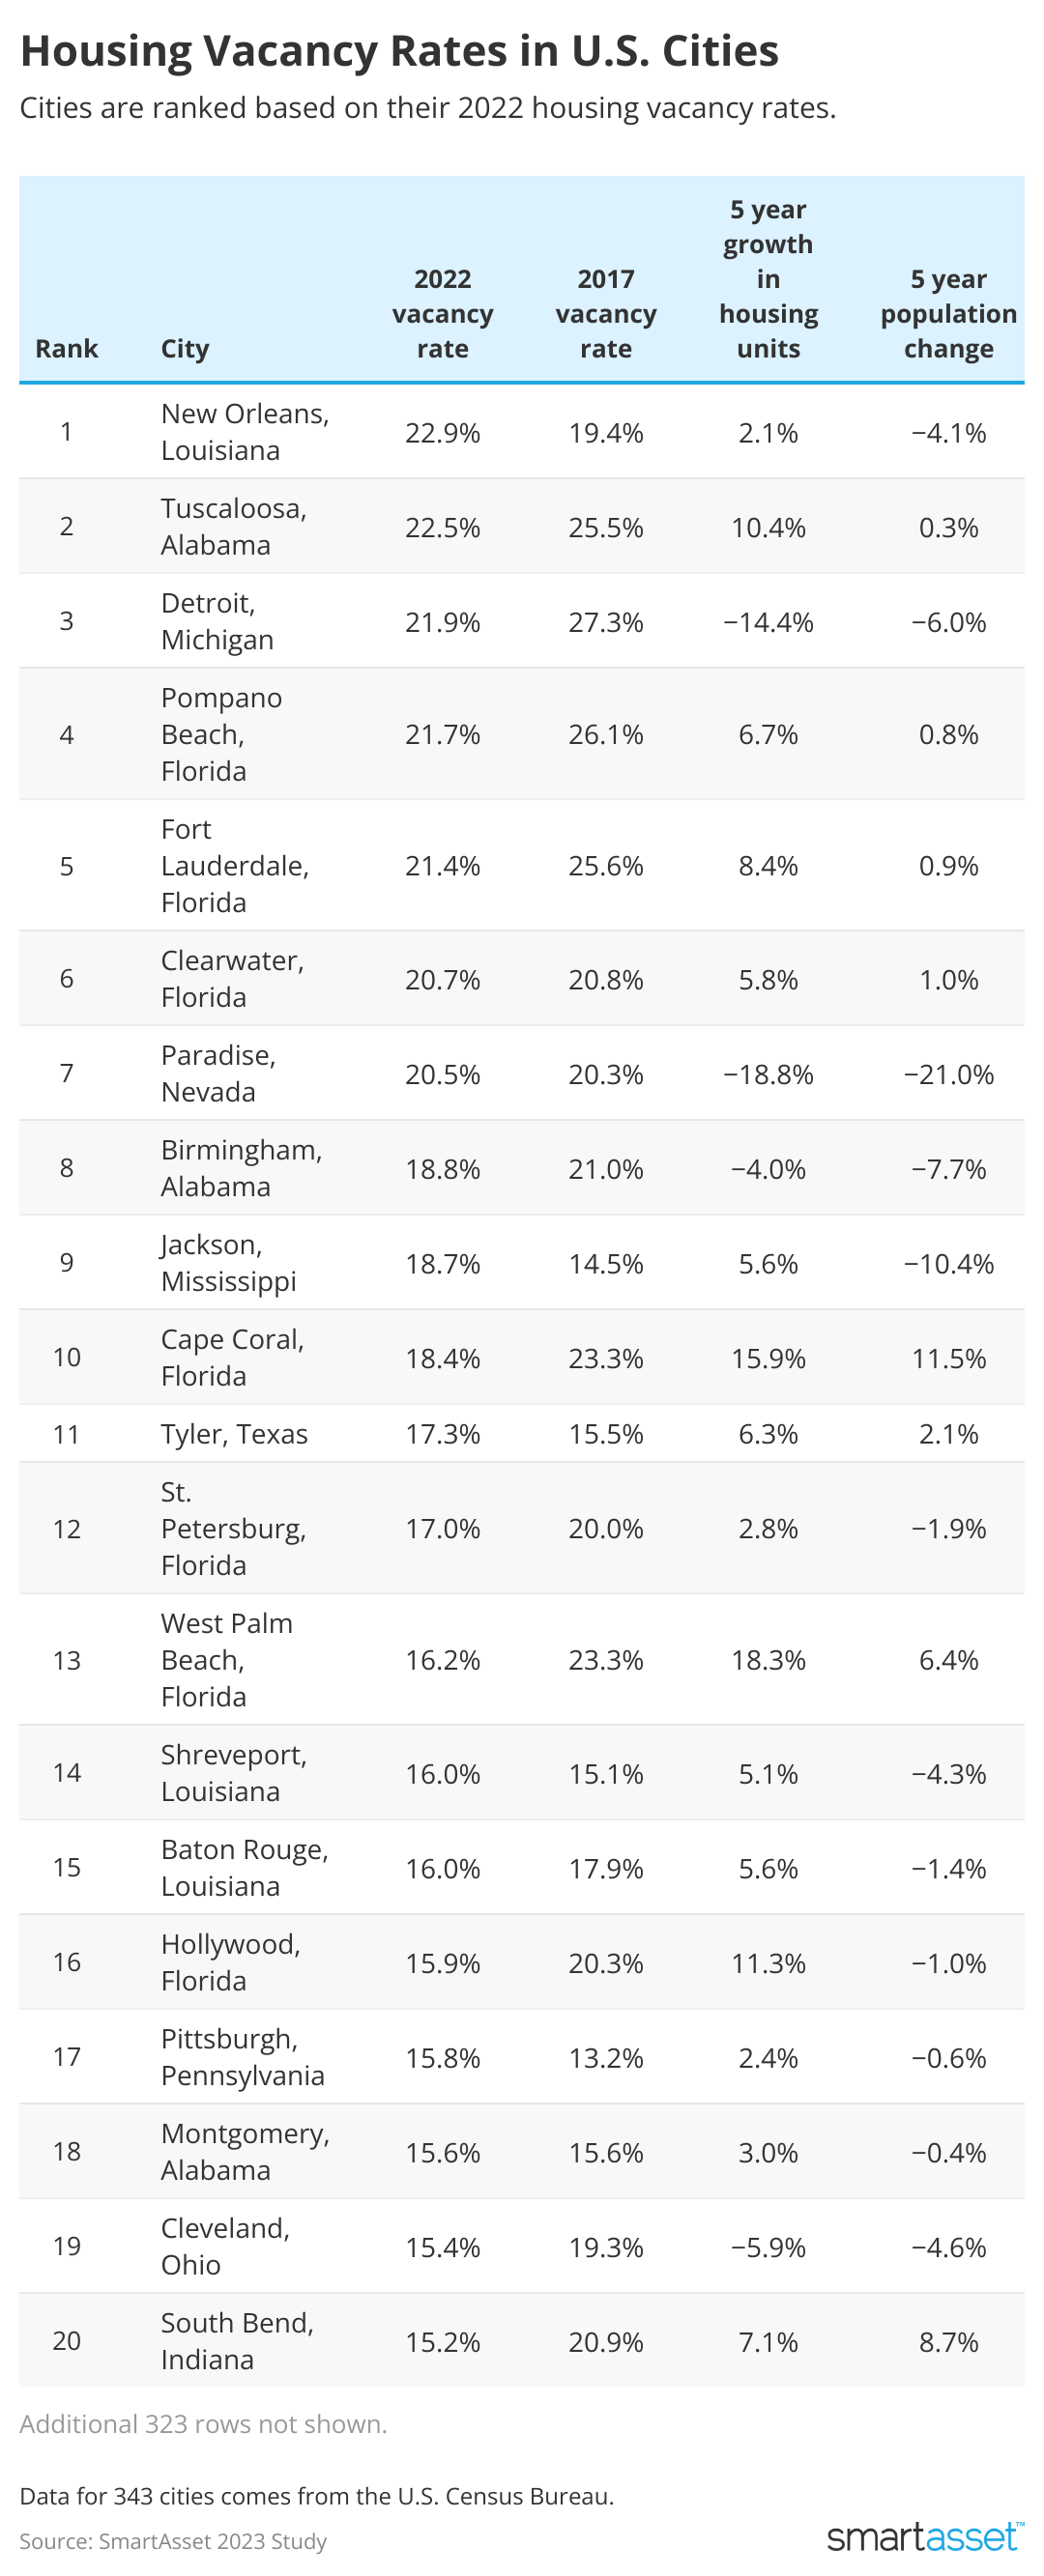 [a chart showing Housing Vacancy Rates in U.S. Cities for the top 20 cities]